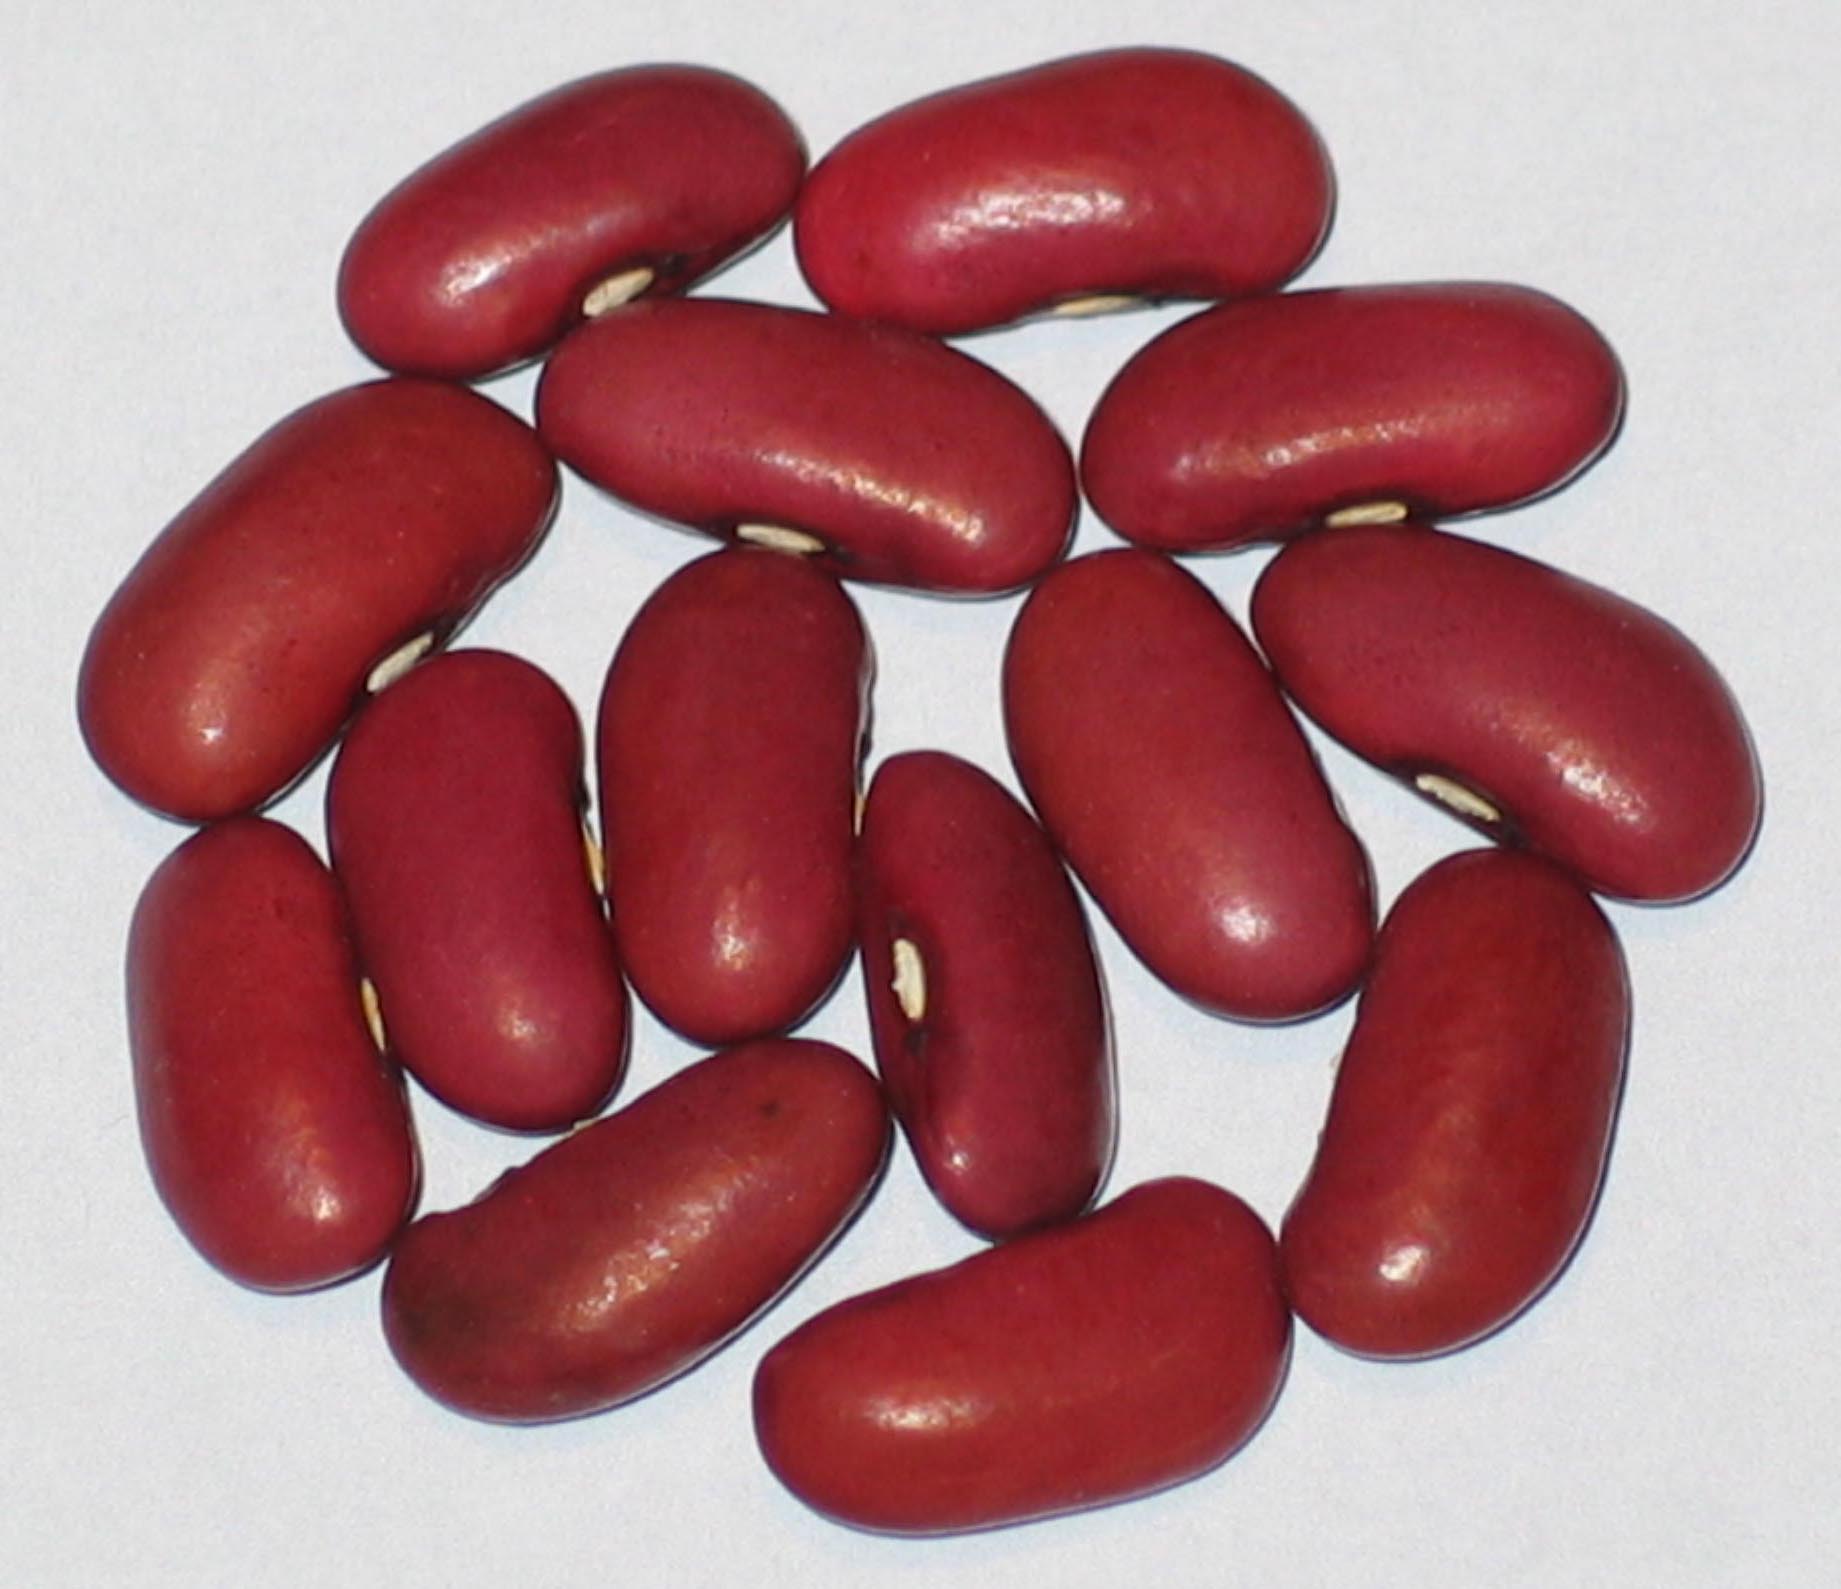 image of Red Eagle beans